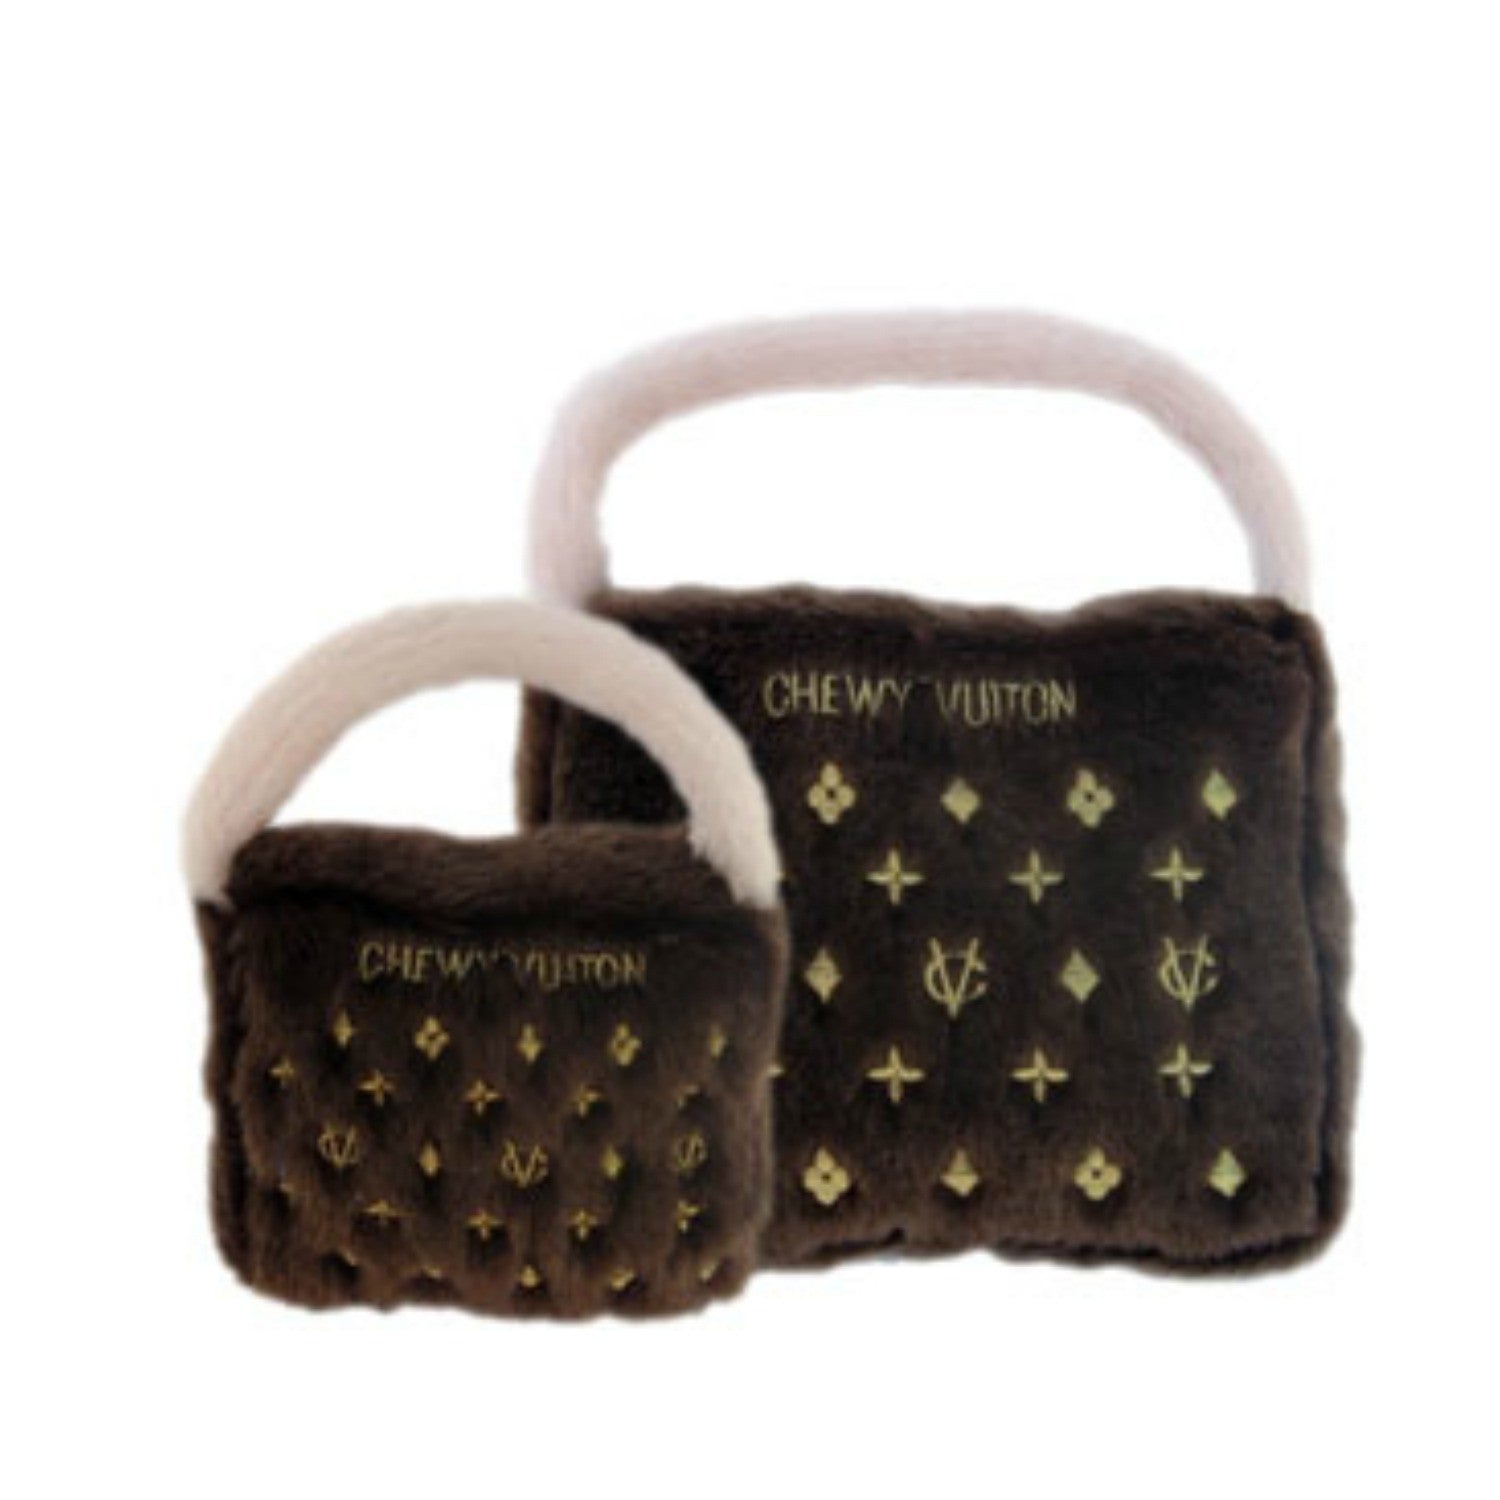 chewy vuitton dog bowls